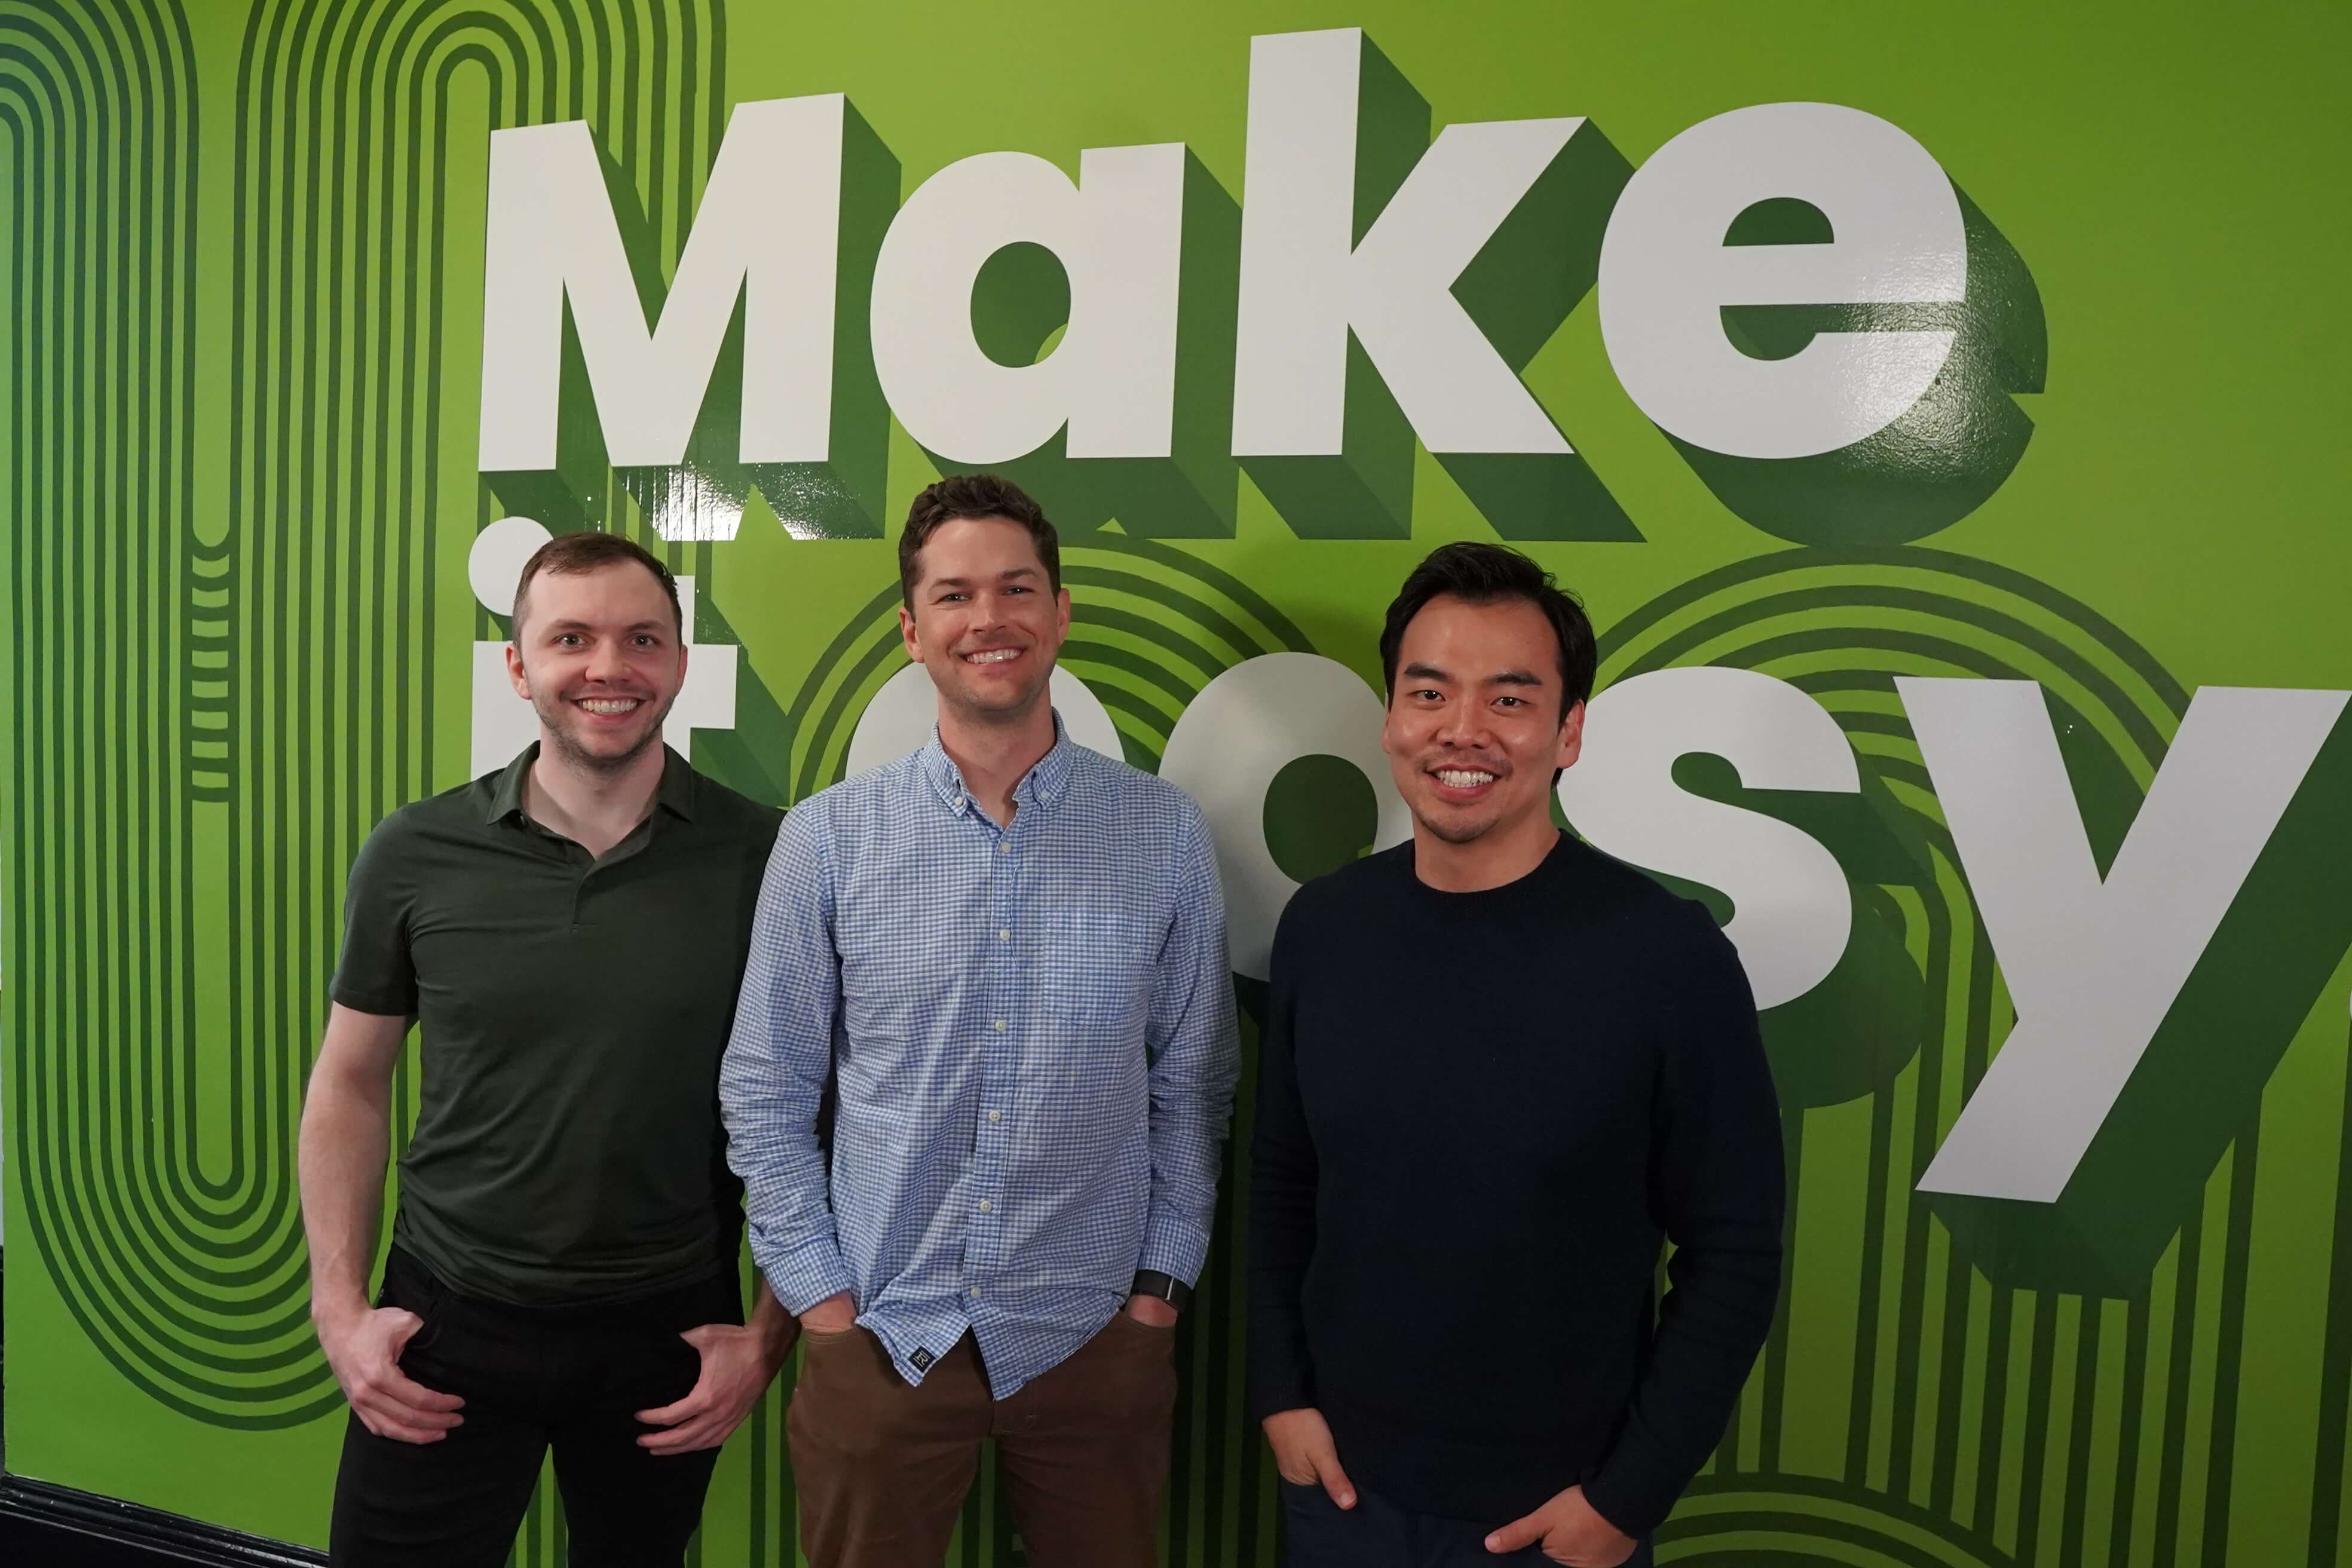 Carmigo's co-founders at the startup’s Tupelo headquarters, Sean Peoples (left), Andrew Warmath (middle), Daniel Kim (right)